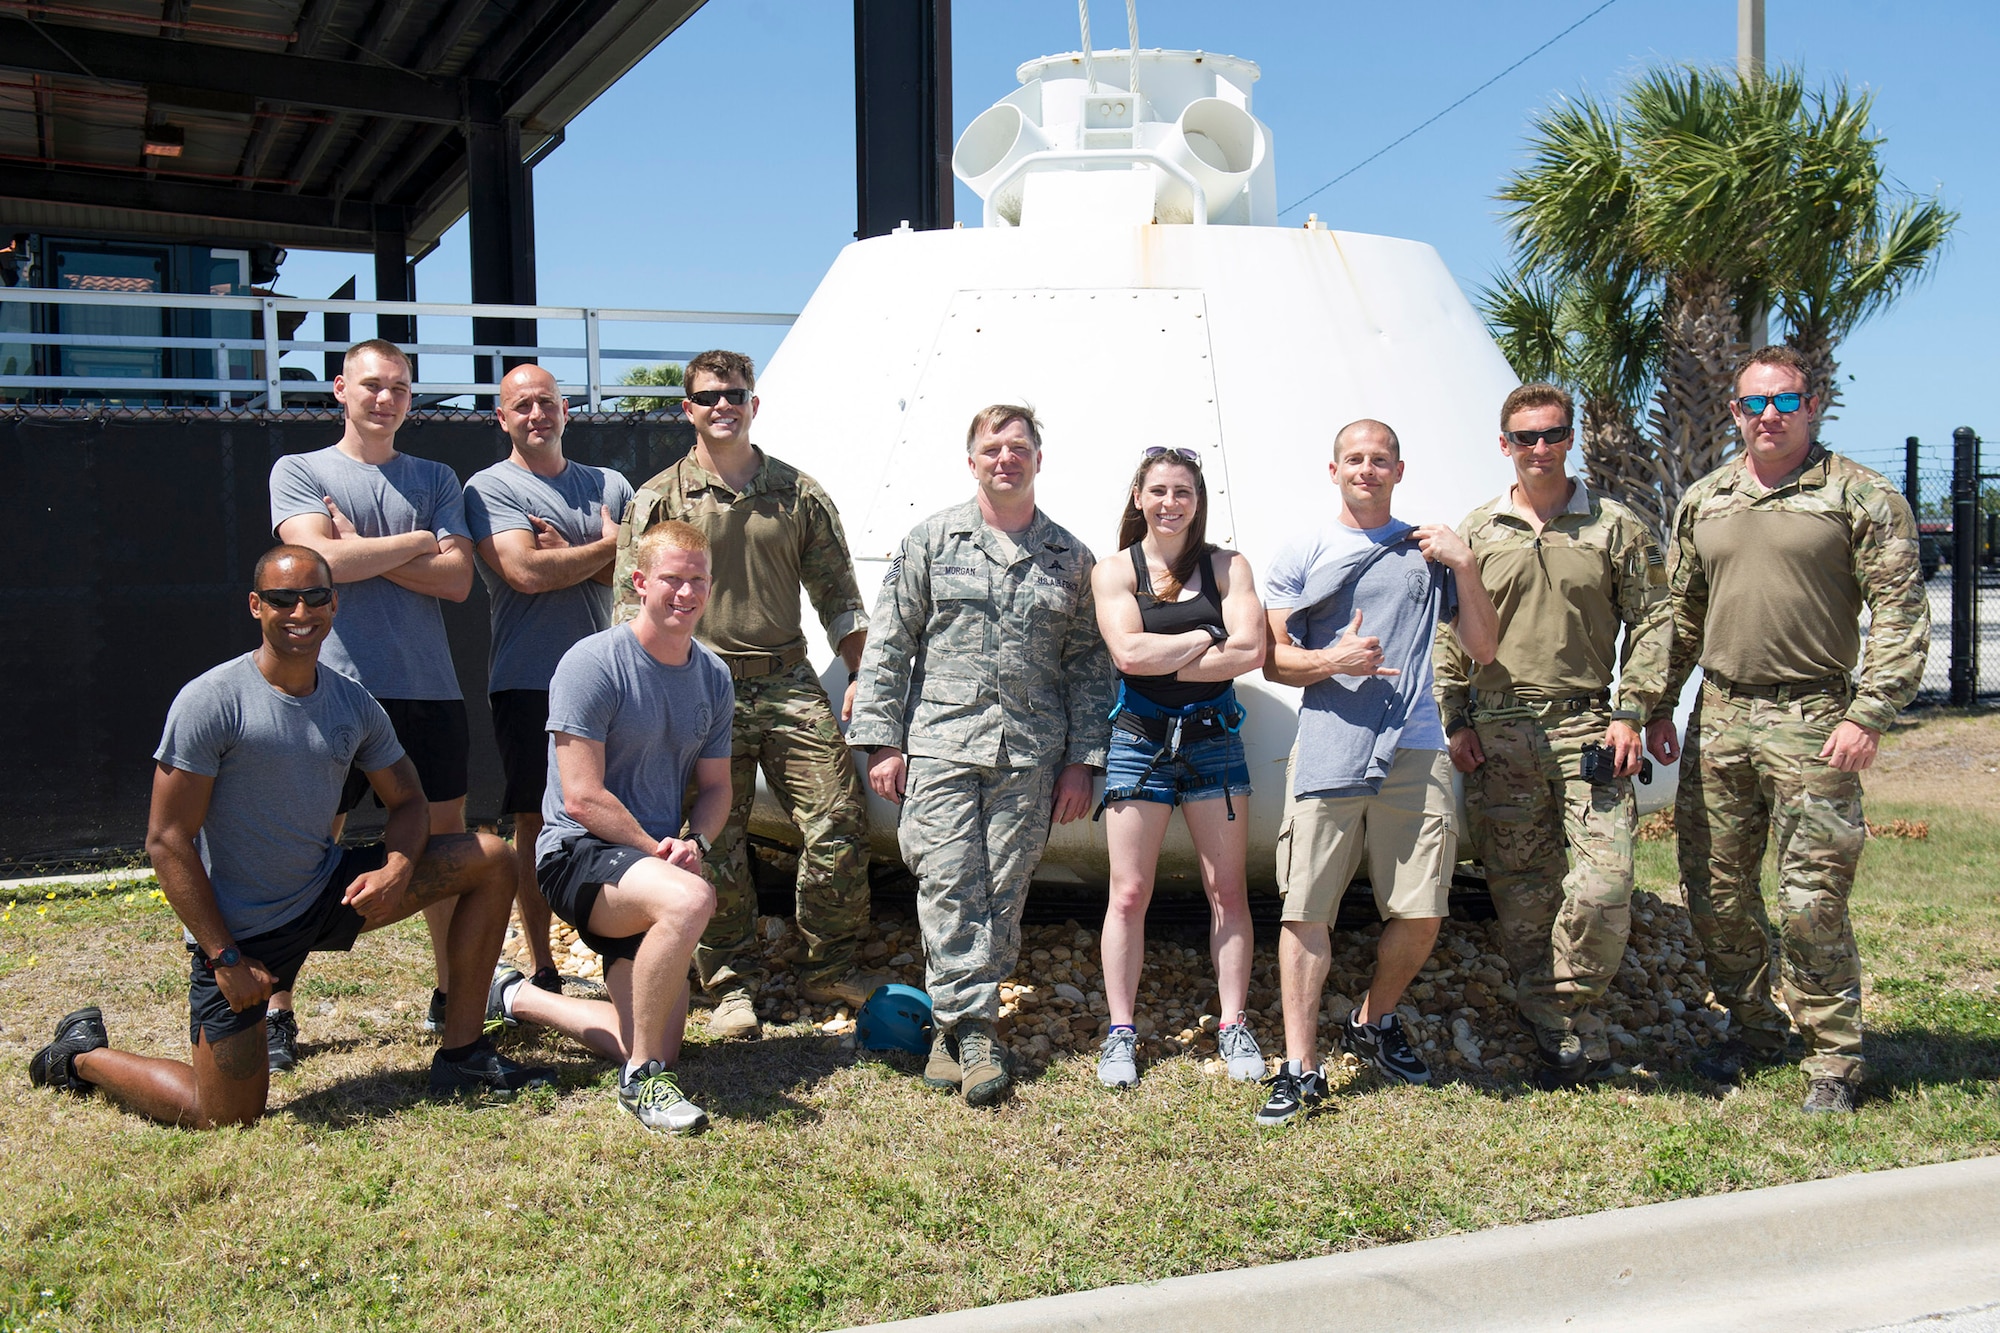 Members of the 308th Rescue Squadron pose with American Ninja Warrior stars Barclay Stockett, center, and Brent Steffensen, third from right, April 21, 2017 after they toured the unit at Patrick Air Force Base, Florida. The television stars visited as part of an Alpha Warrior Military Tour in which they visited with fans the first day and hosted a Ninja Warrior style competition the following day at the base. (U.S. Air Force photo/Phillip Sunkel)

